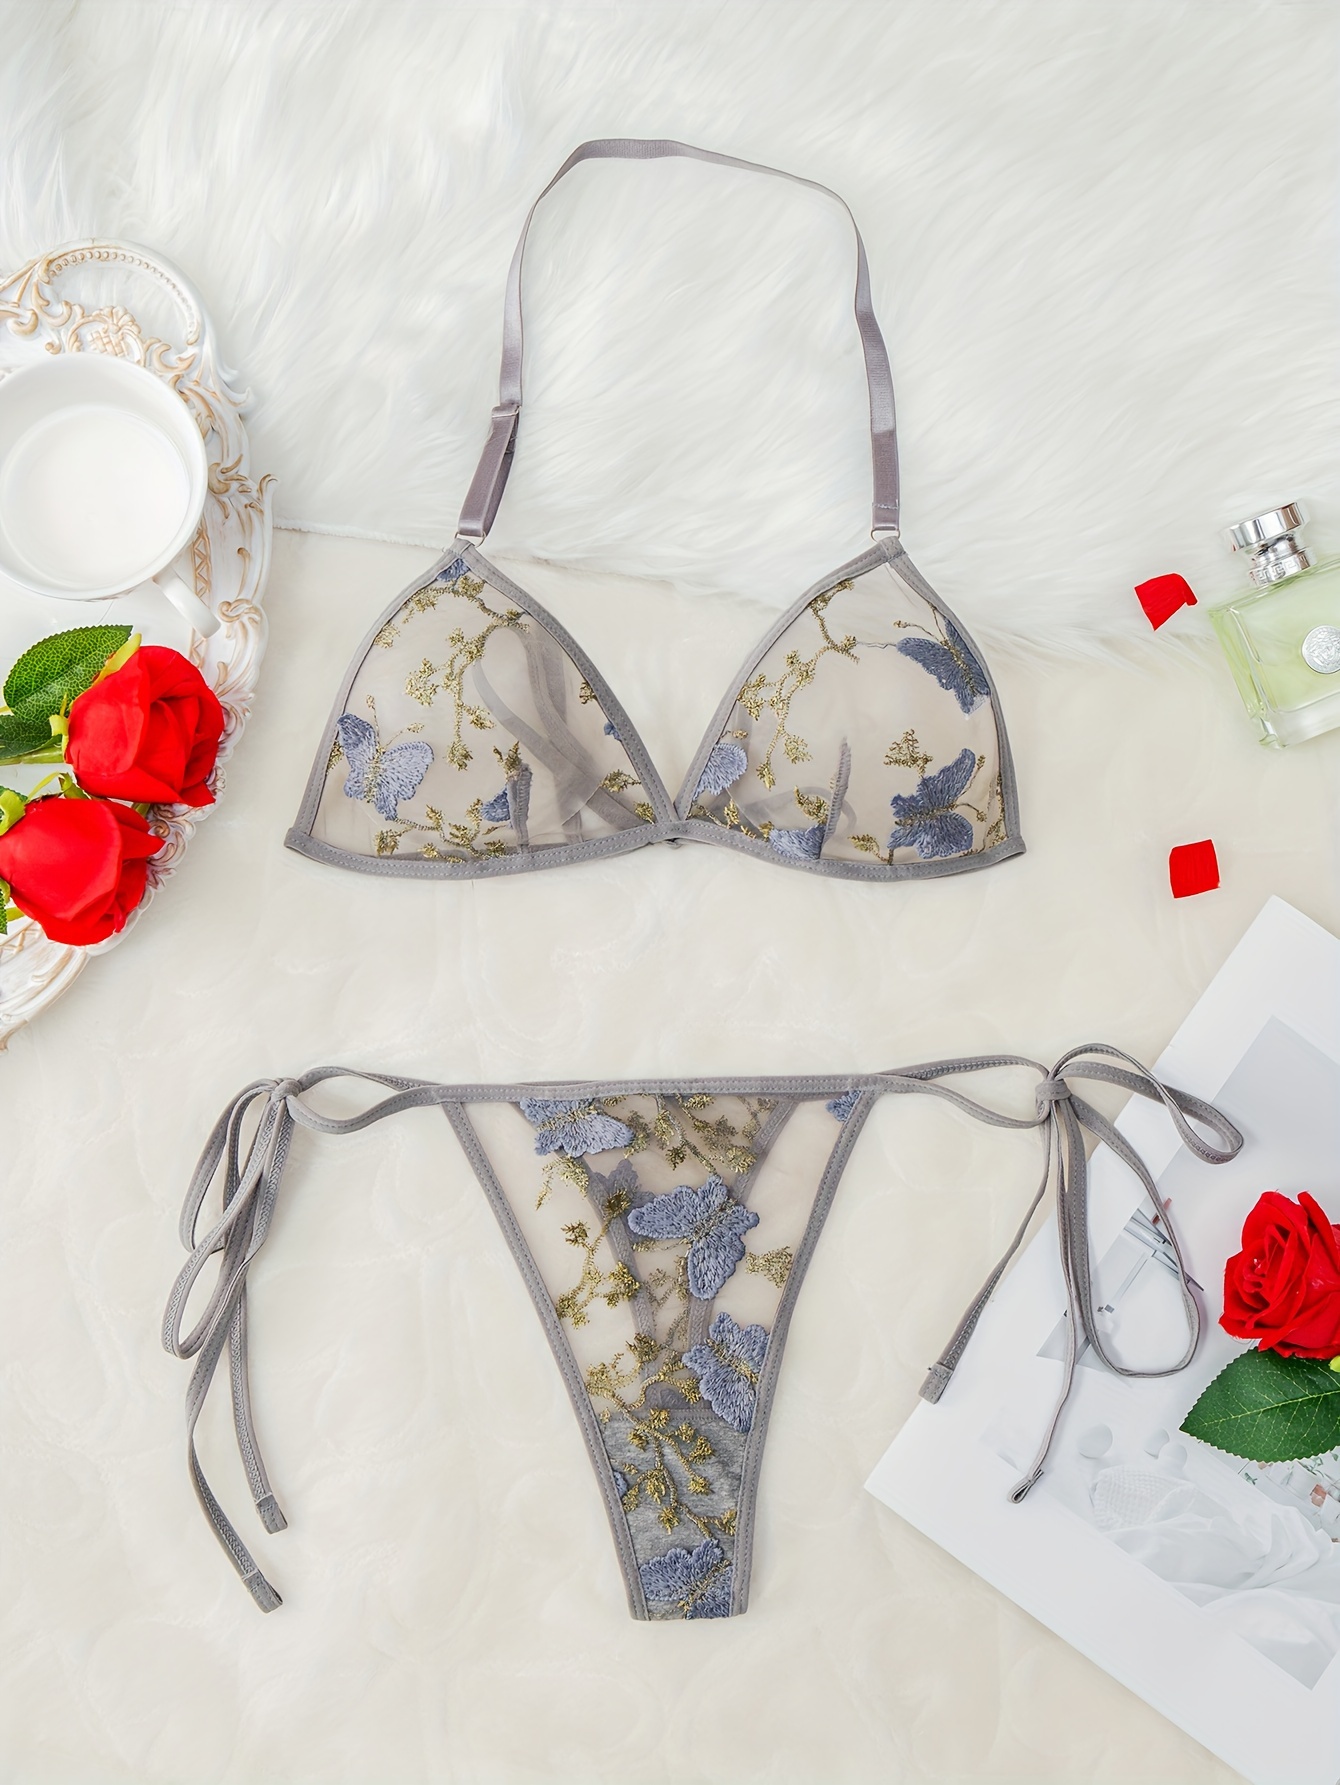 Plus Butterfly Embroidery Sheer Mesh Lingerie Set